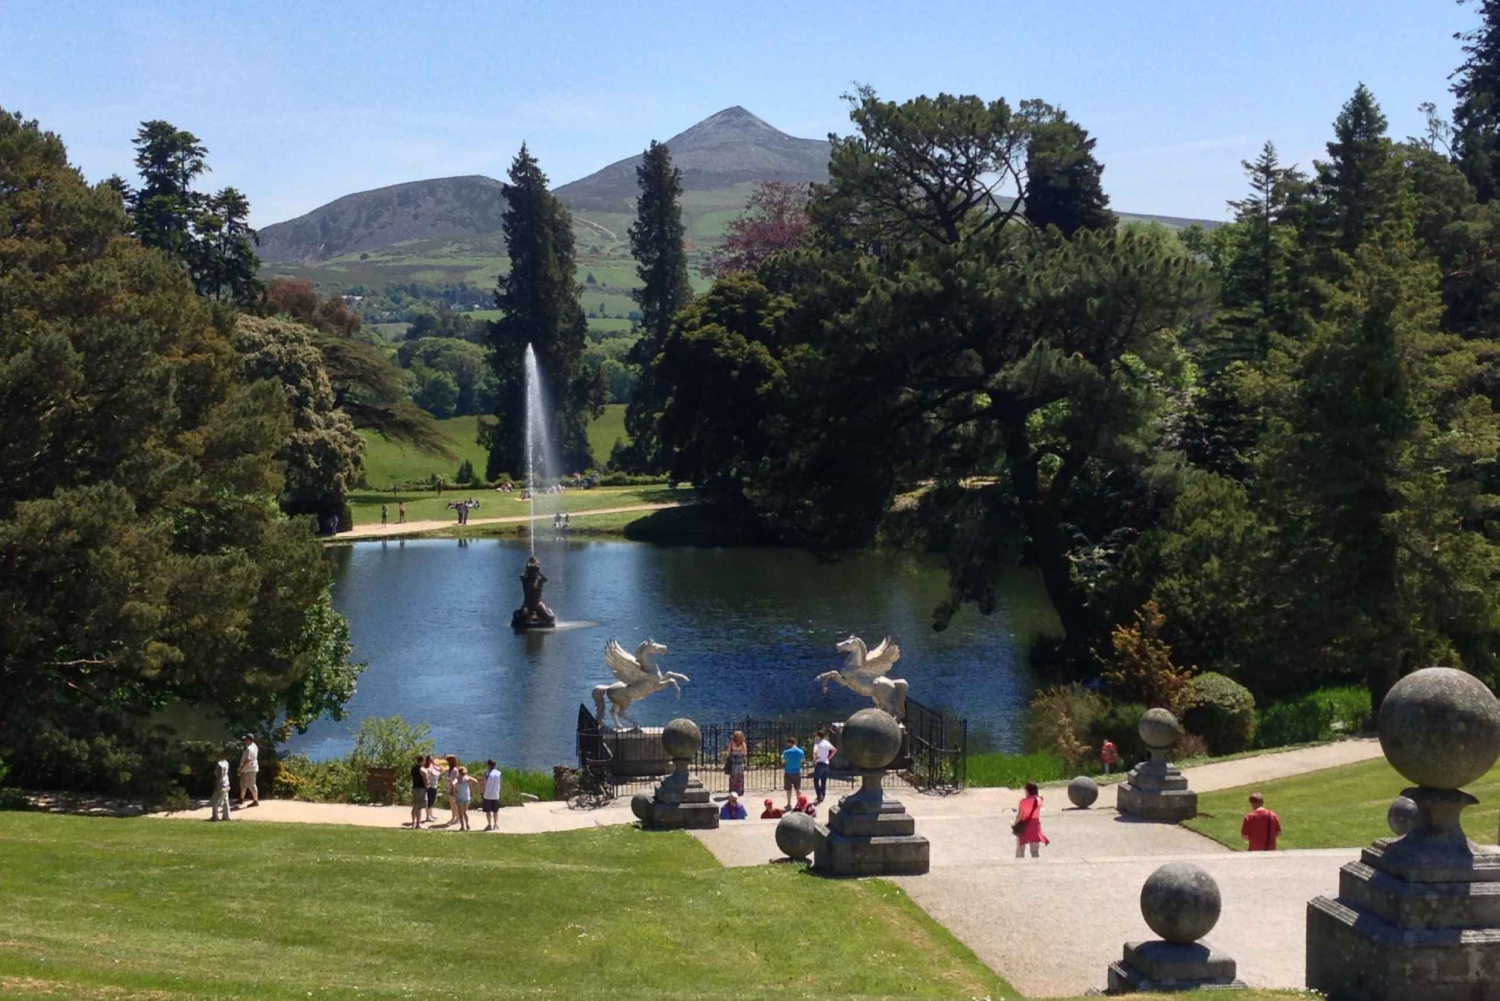 Powerscourt House and Gardens Private Tour from Dublin